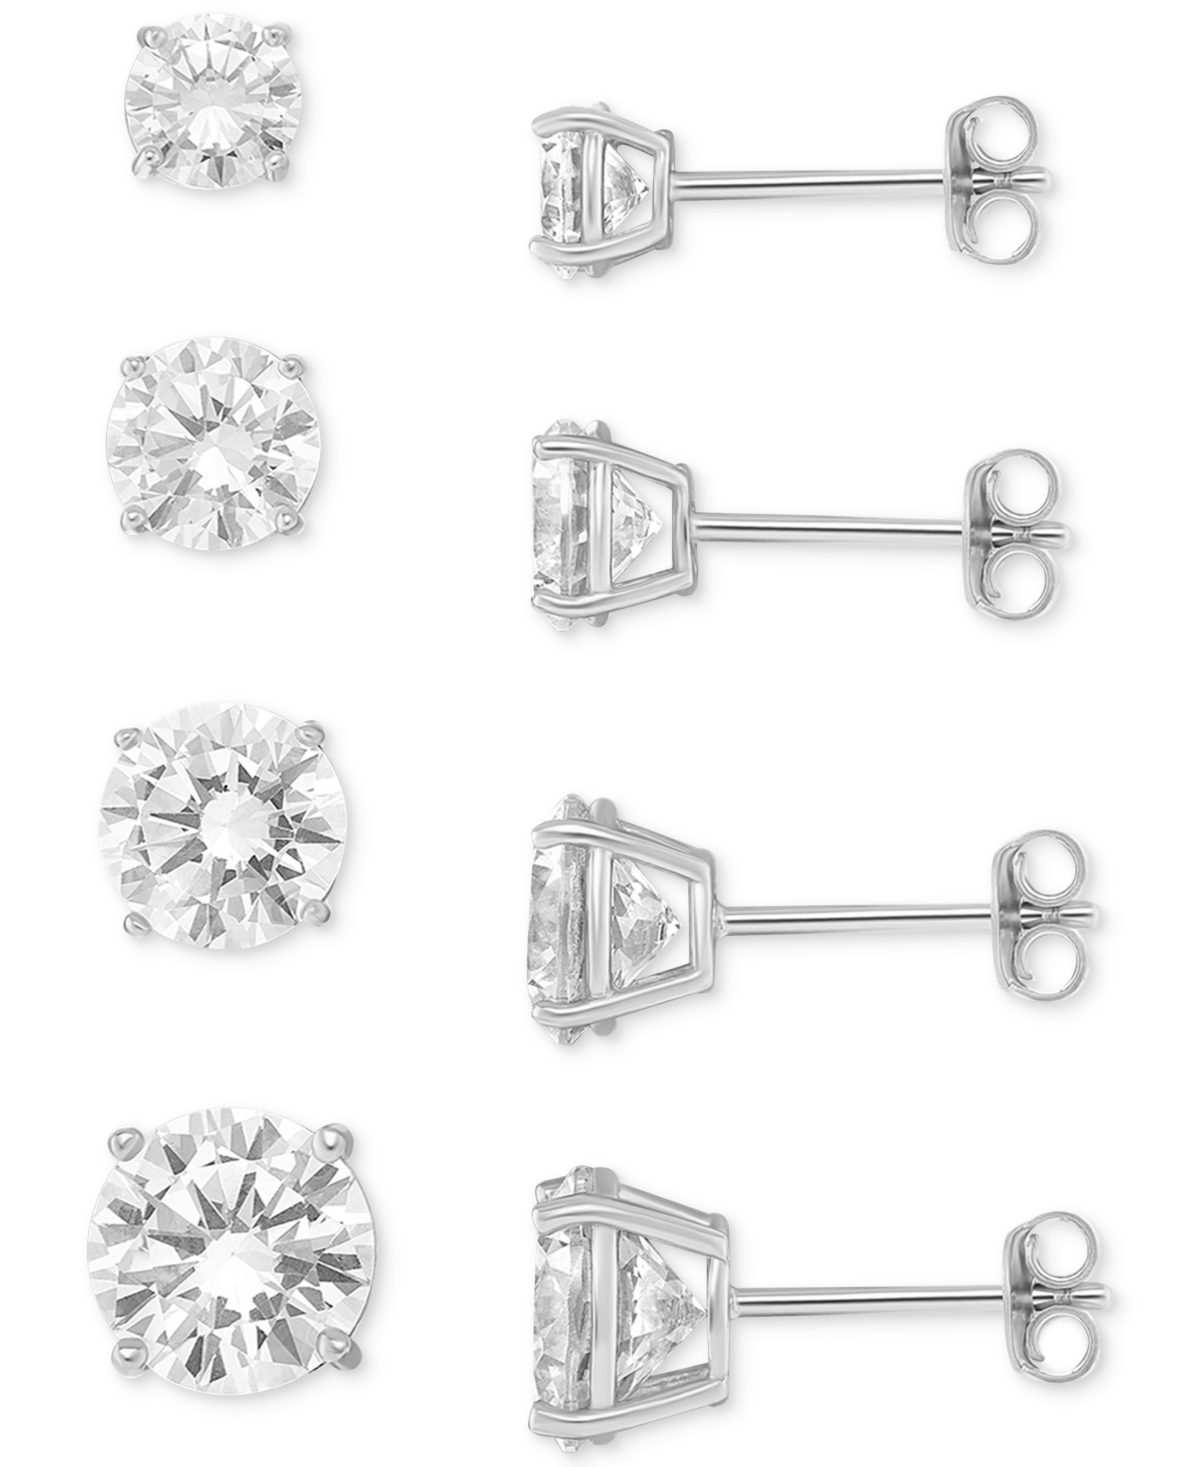 Giani Bernini 4-pc. Set Cubic Zirconia Graduated Solitaire Stud Earrings In Sterling Silver, Created For Macy's